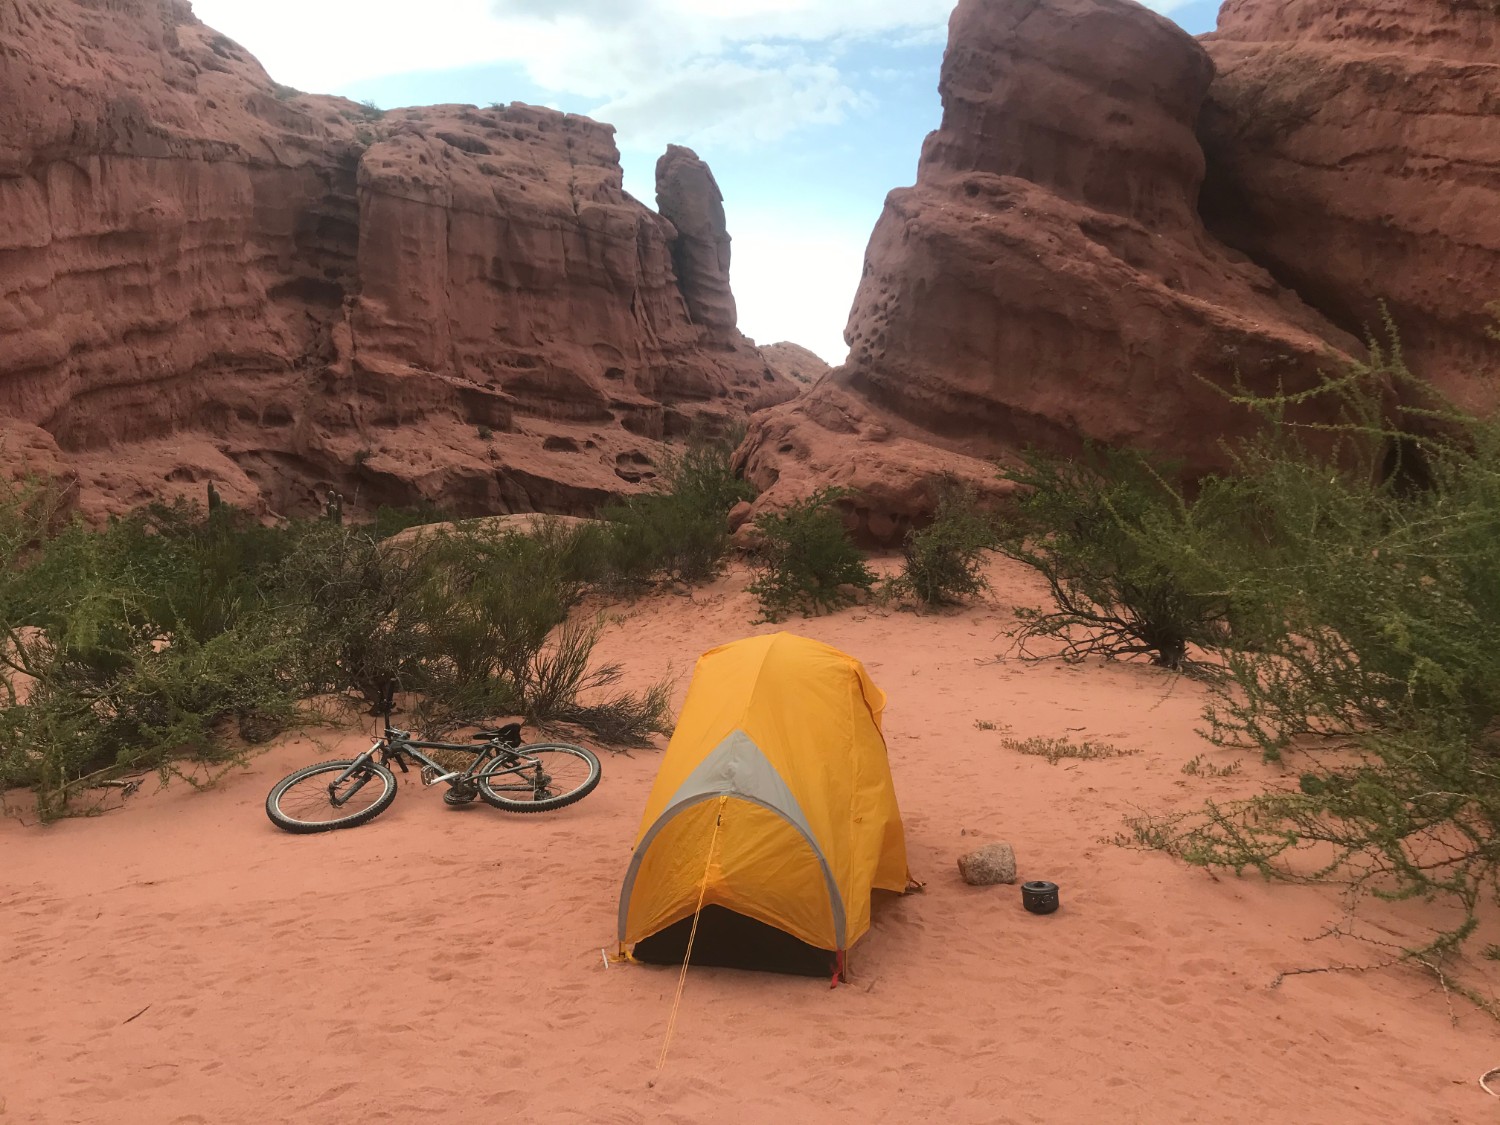 Solo camping in Argentina - image of a solo tent and a bicycle with pillar formations behind